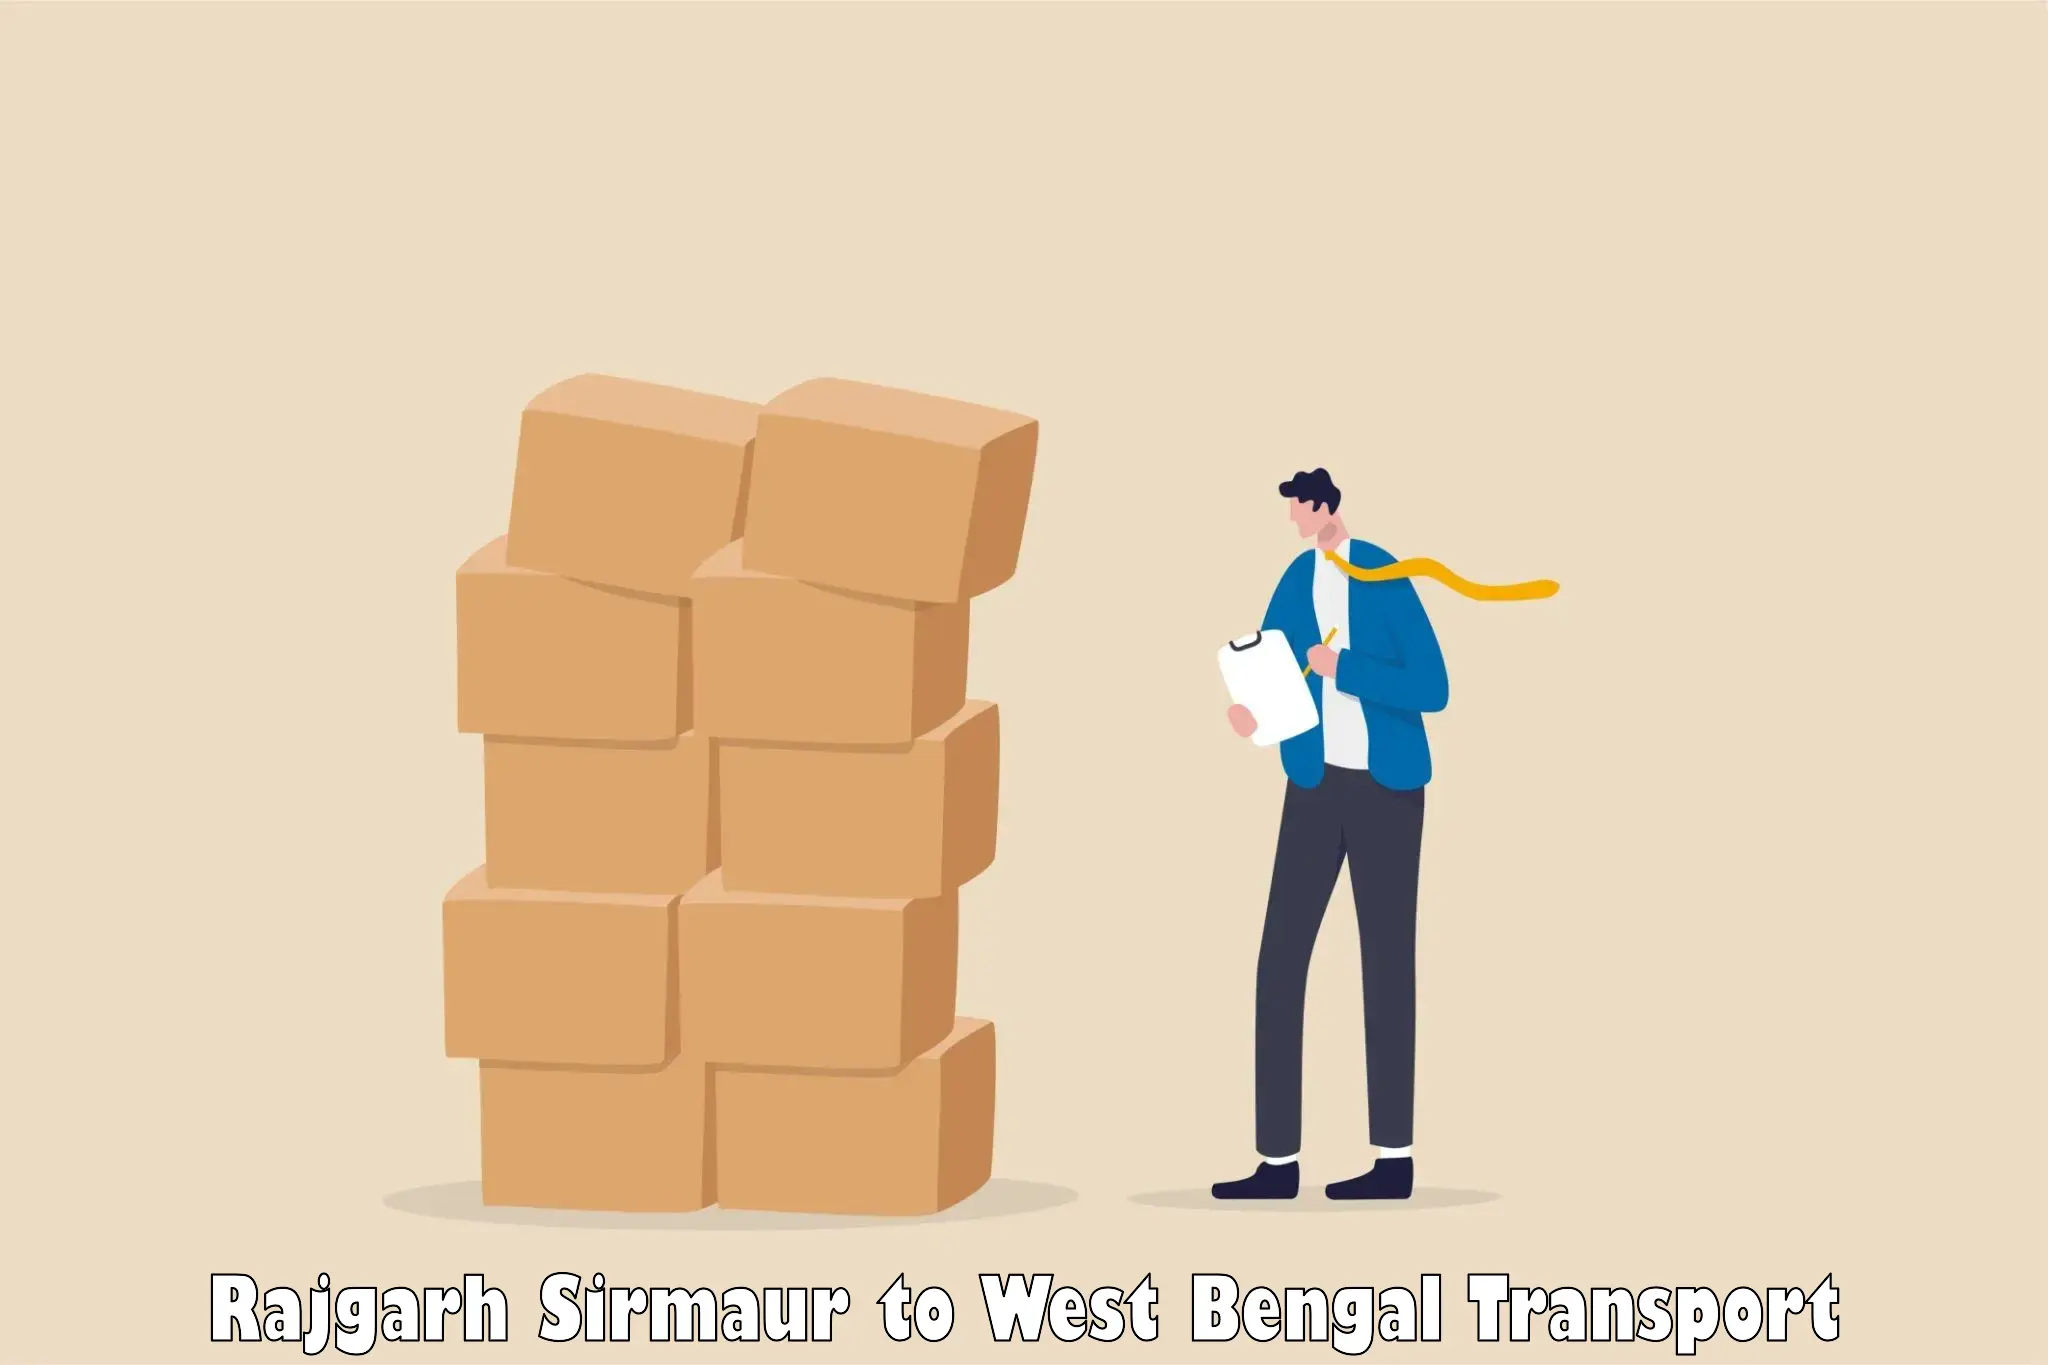 Transport shared services Rajgarh Sirmaur to Barrackpore